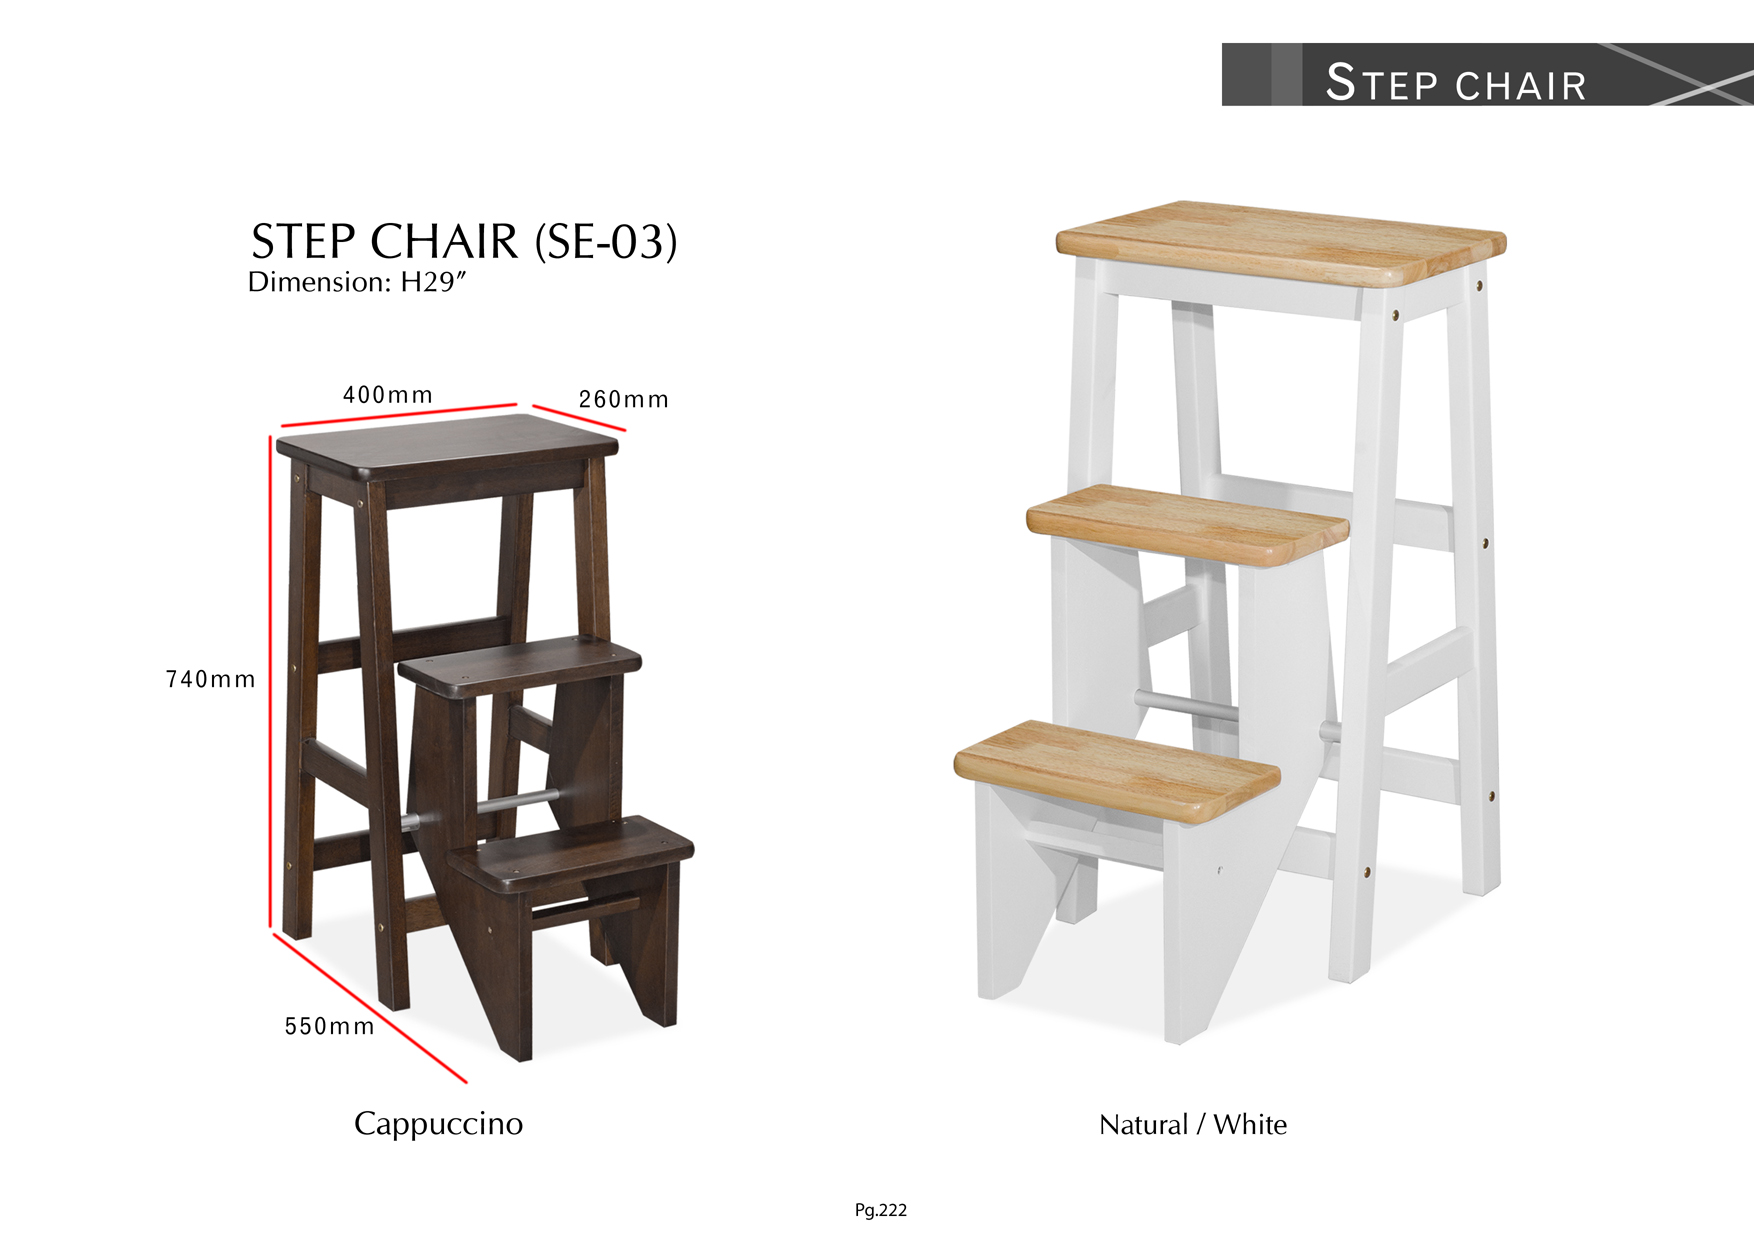 Product: PG222. STEP CHAIR